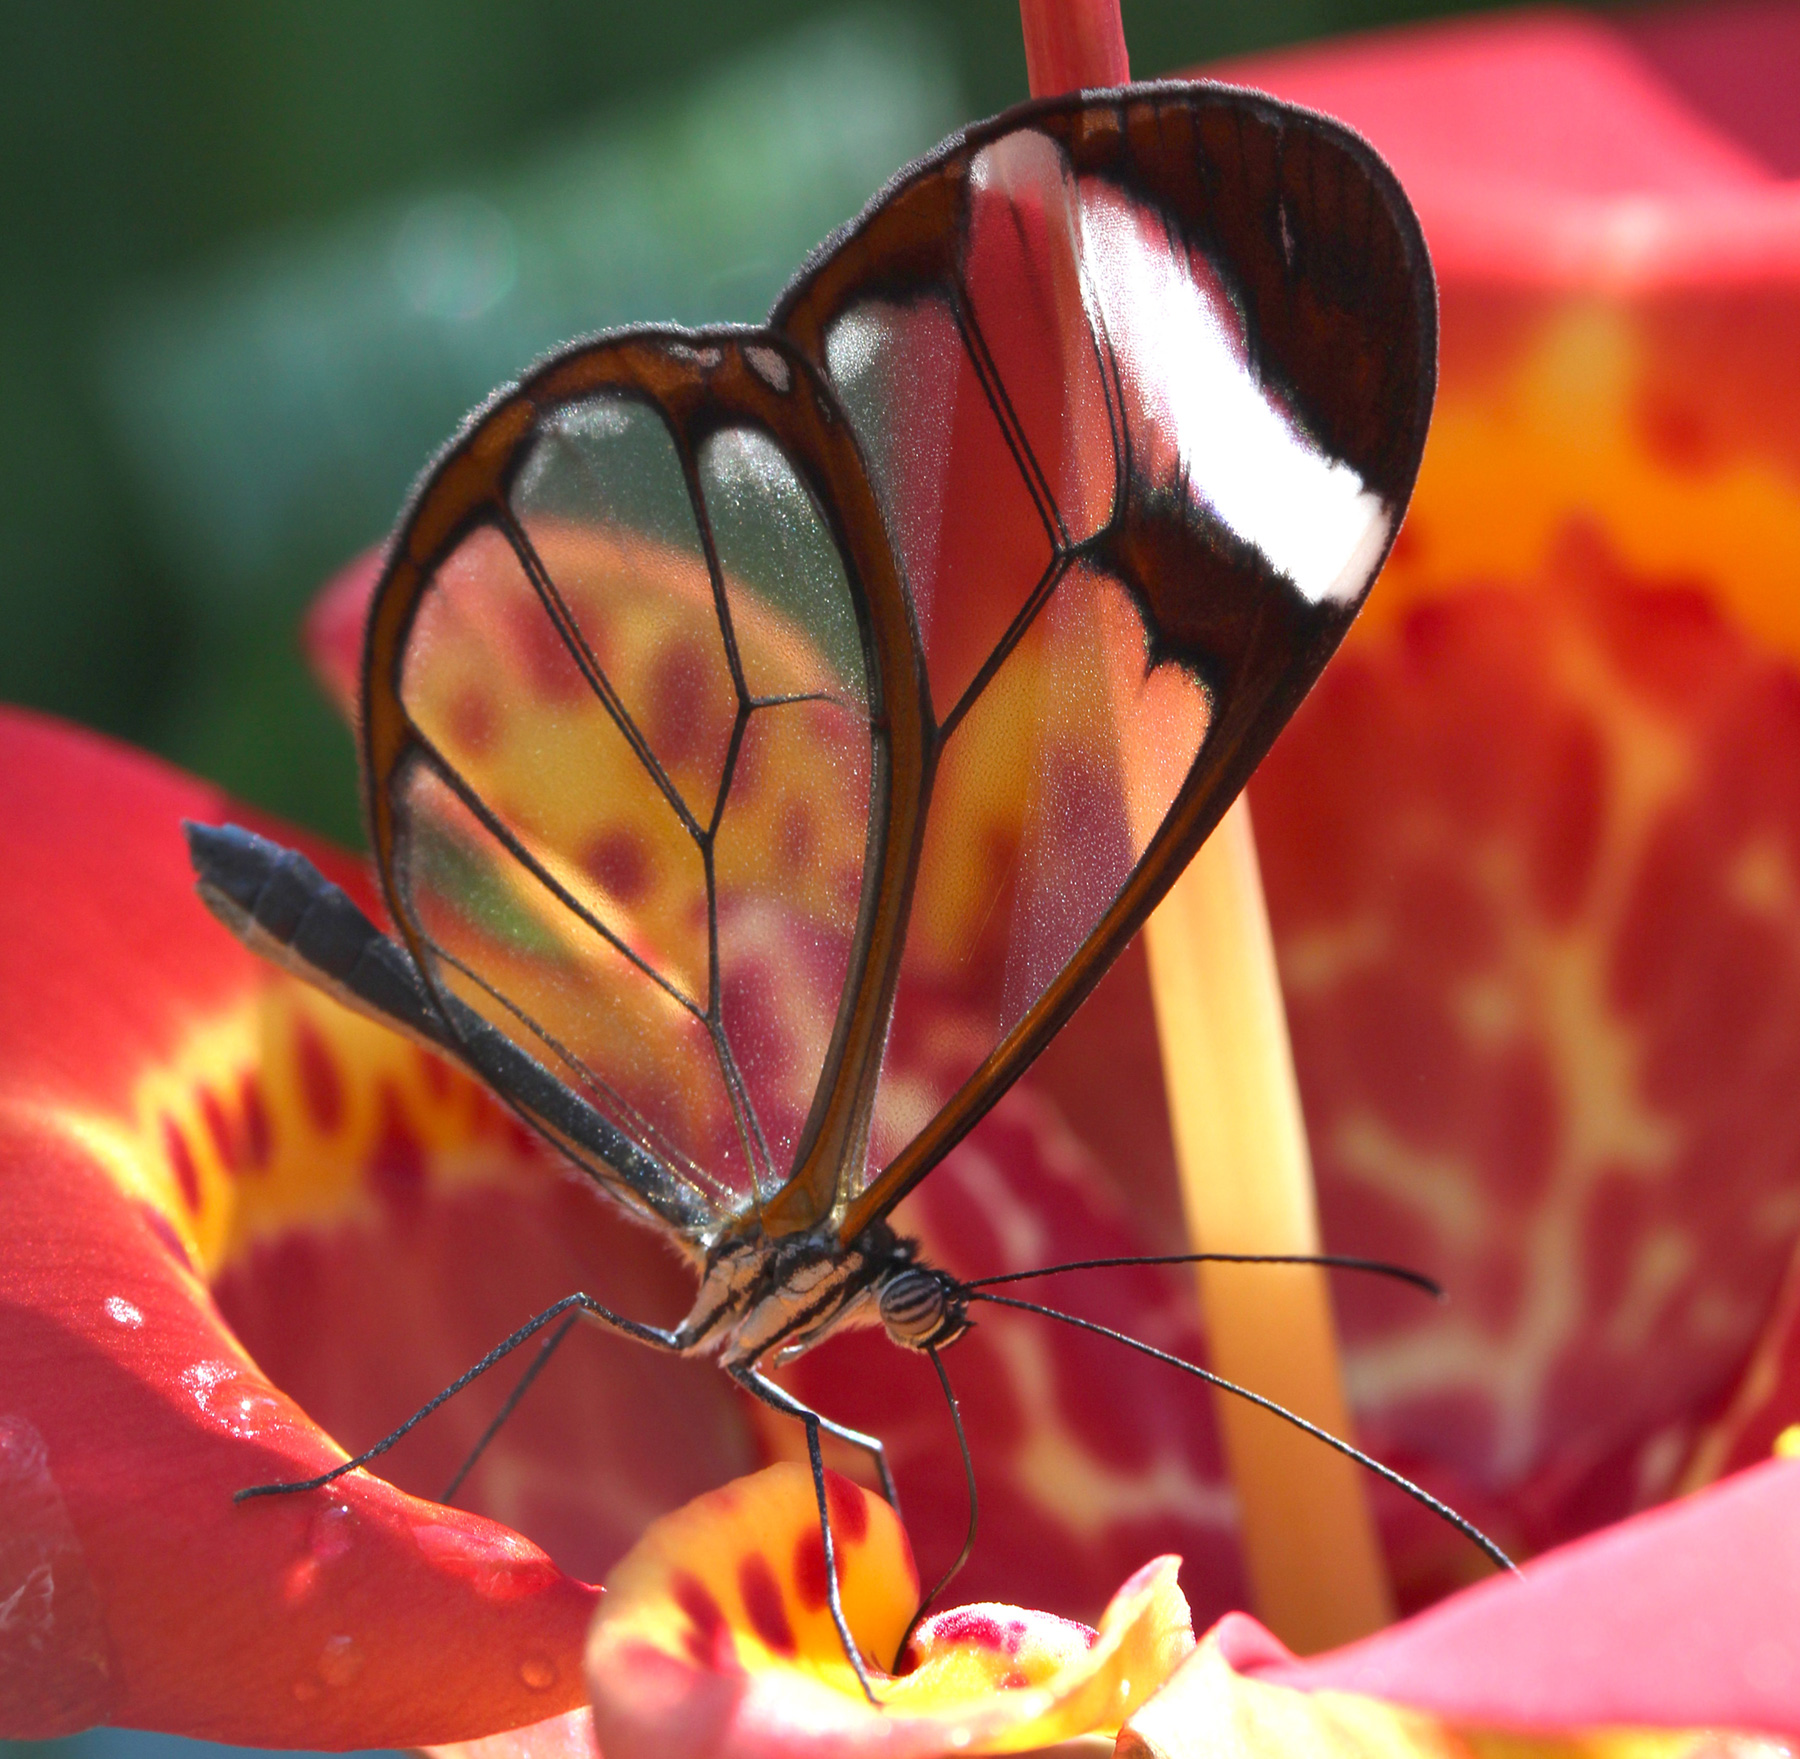 Butterfly with transparent wings sits on a red flower